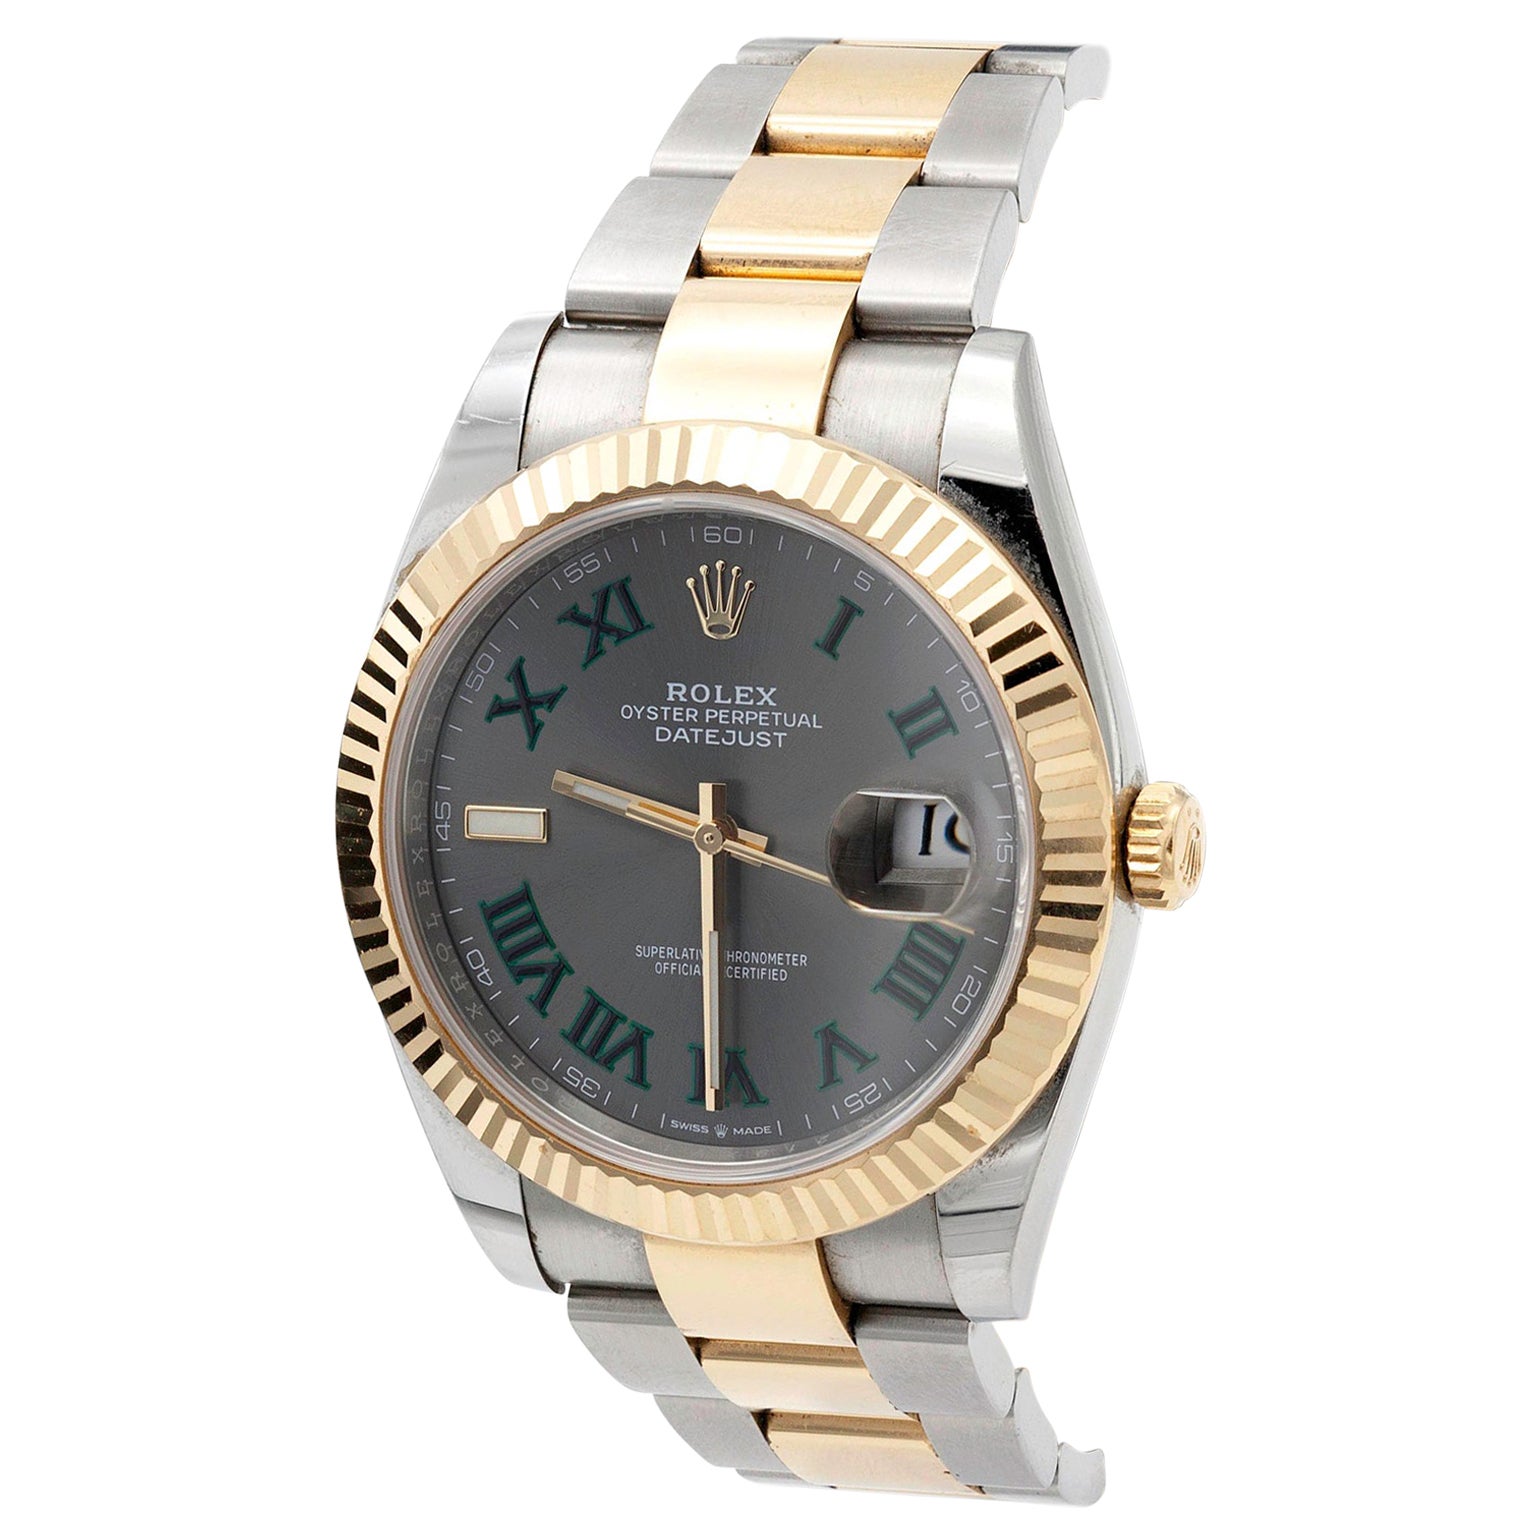 Rolex Datejust 41 Yellow Gold and Stainless Steel 12633 Men's Watch